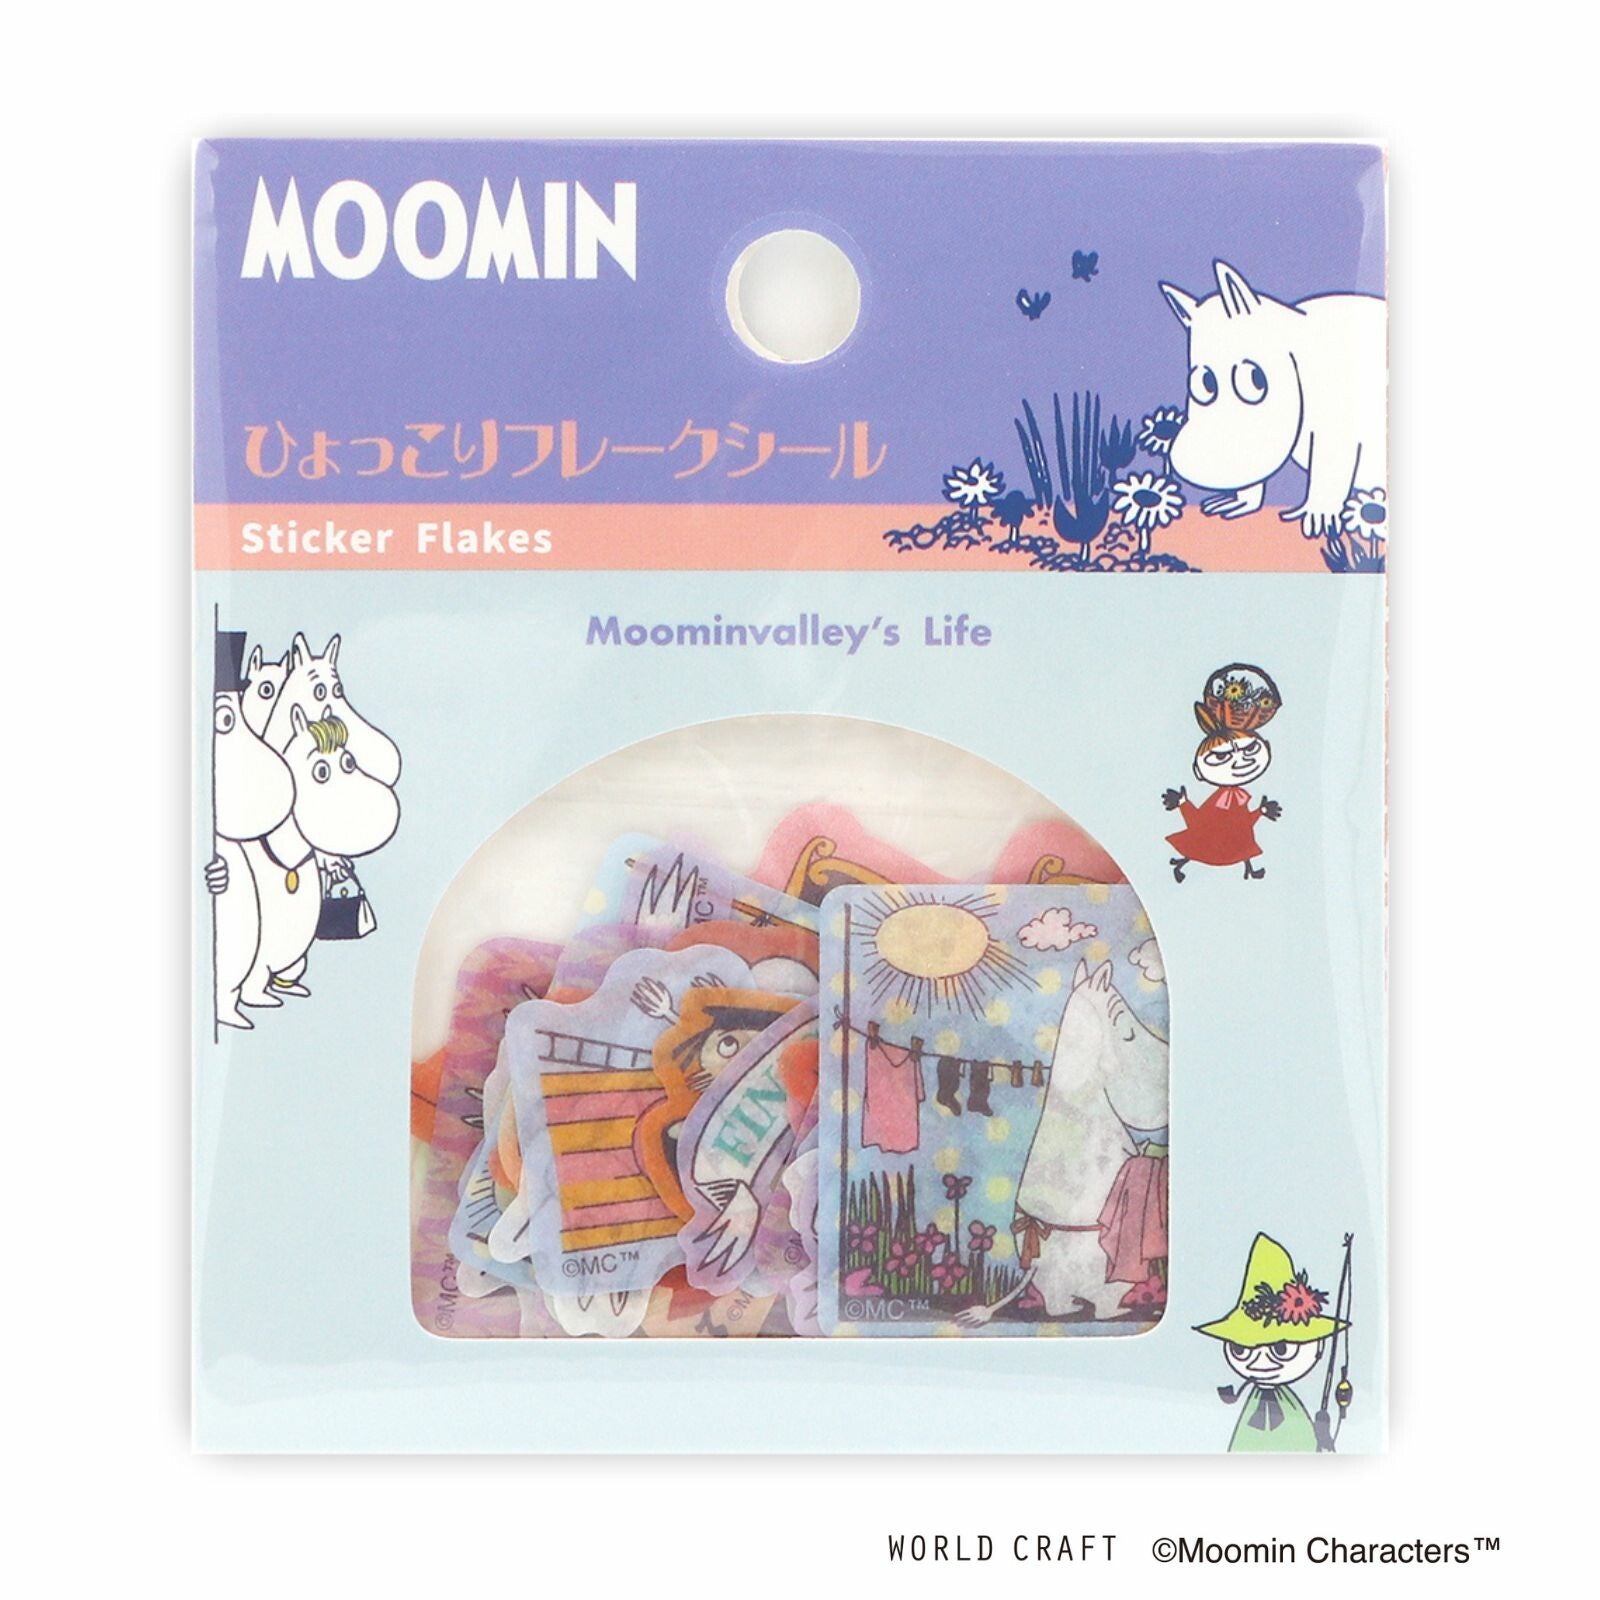 The Moomins Washi Deco Sticker Flakes Moominvalley's Life